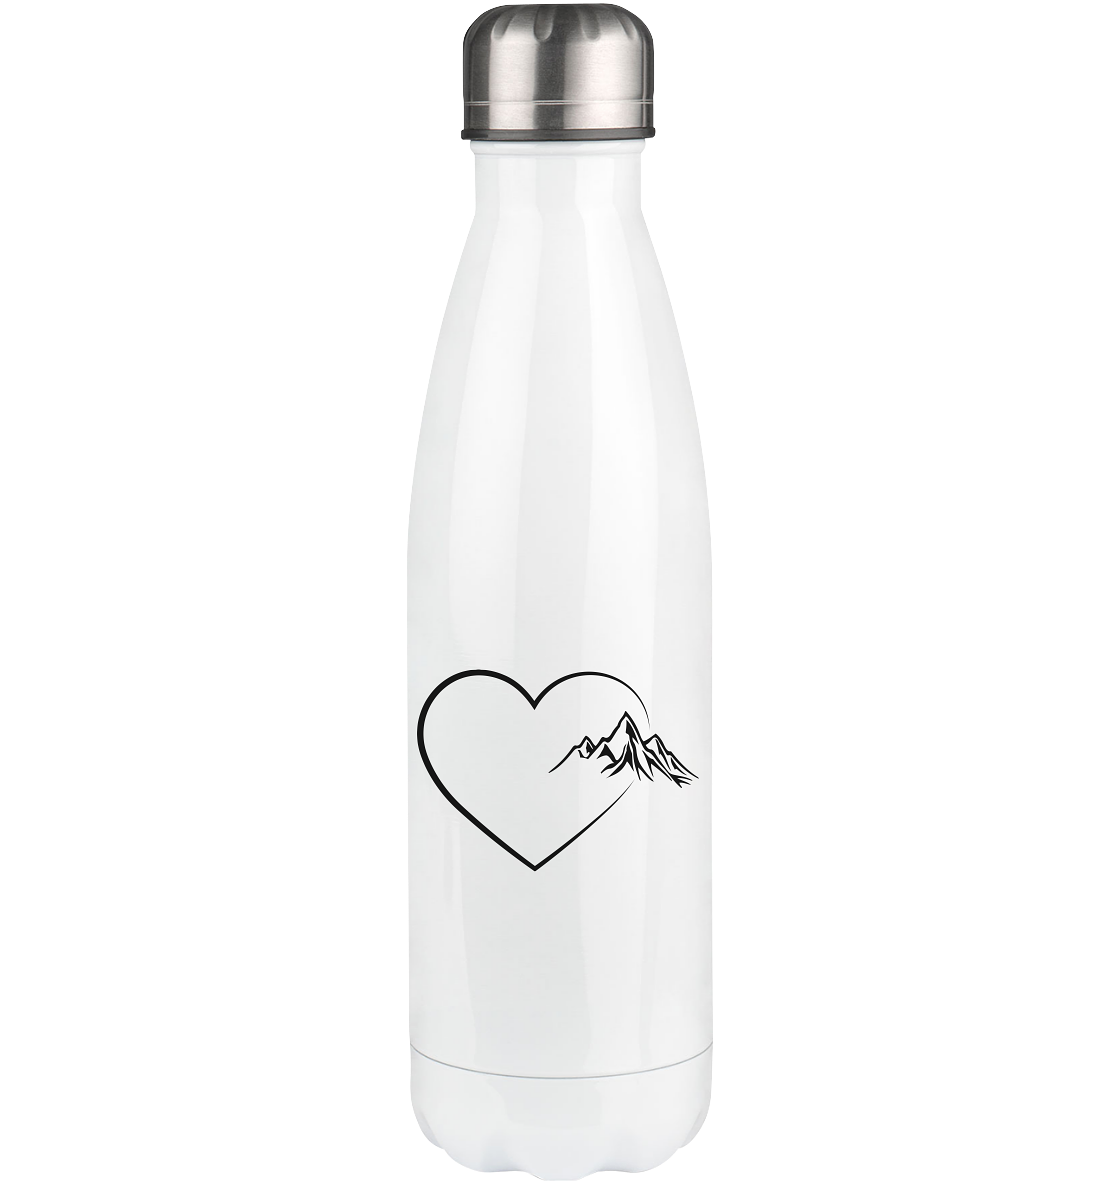 Heart 2 and Mountain - Edelstahl Thermosflasche berge 500ml